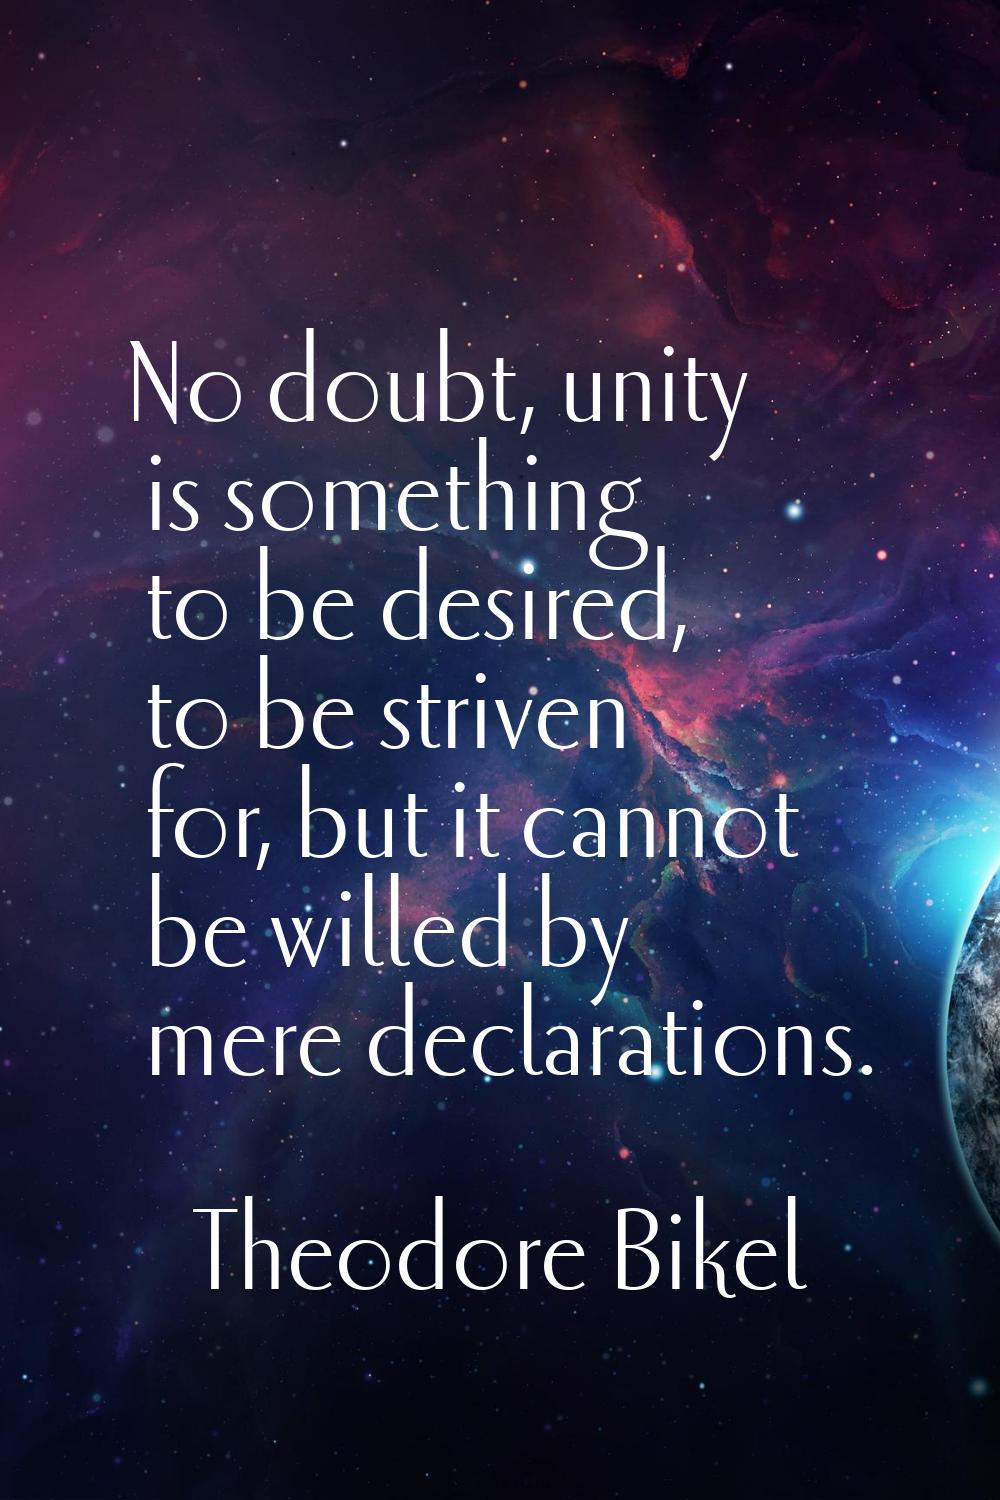 No doubt, unity is something to be desired, to be striven for, but it cannot be willed by mere decl